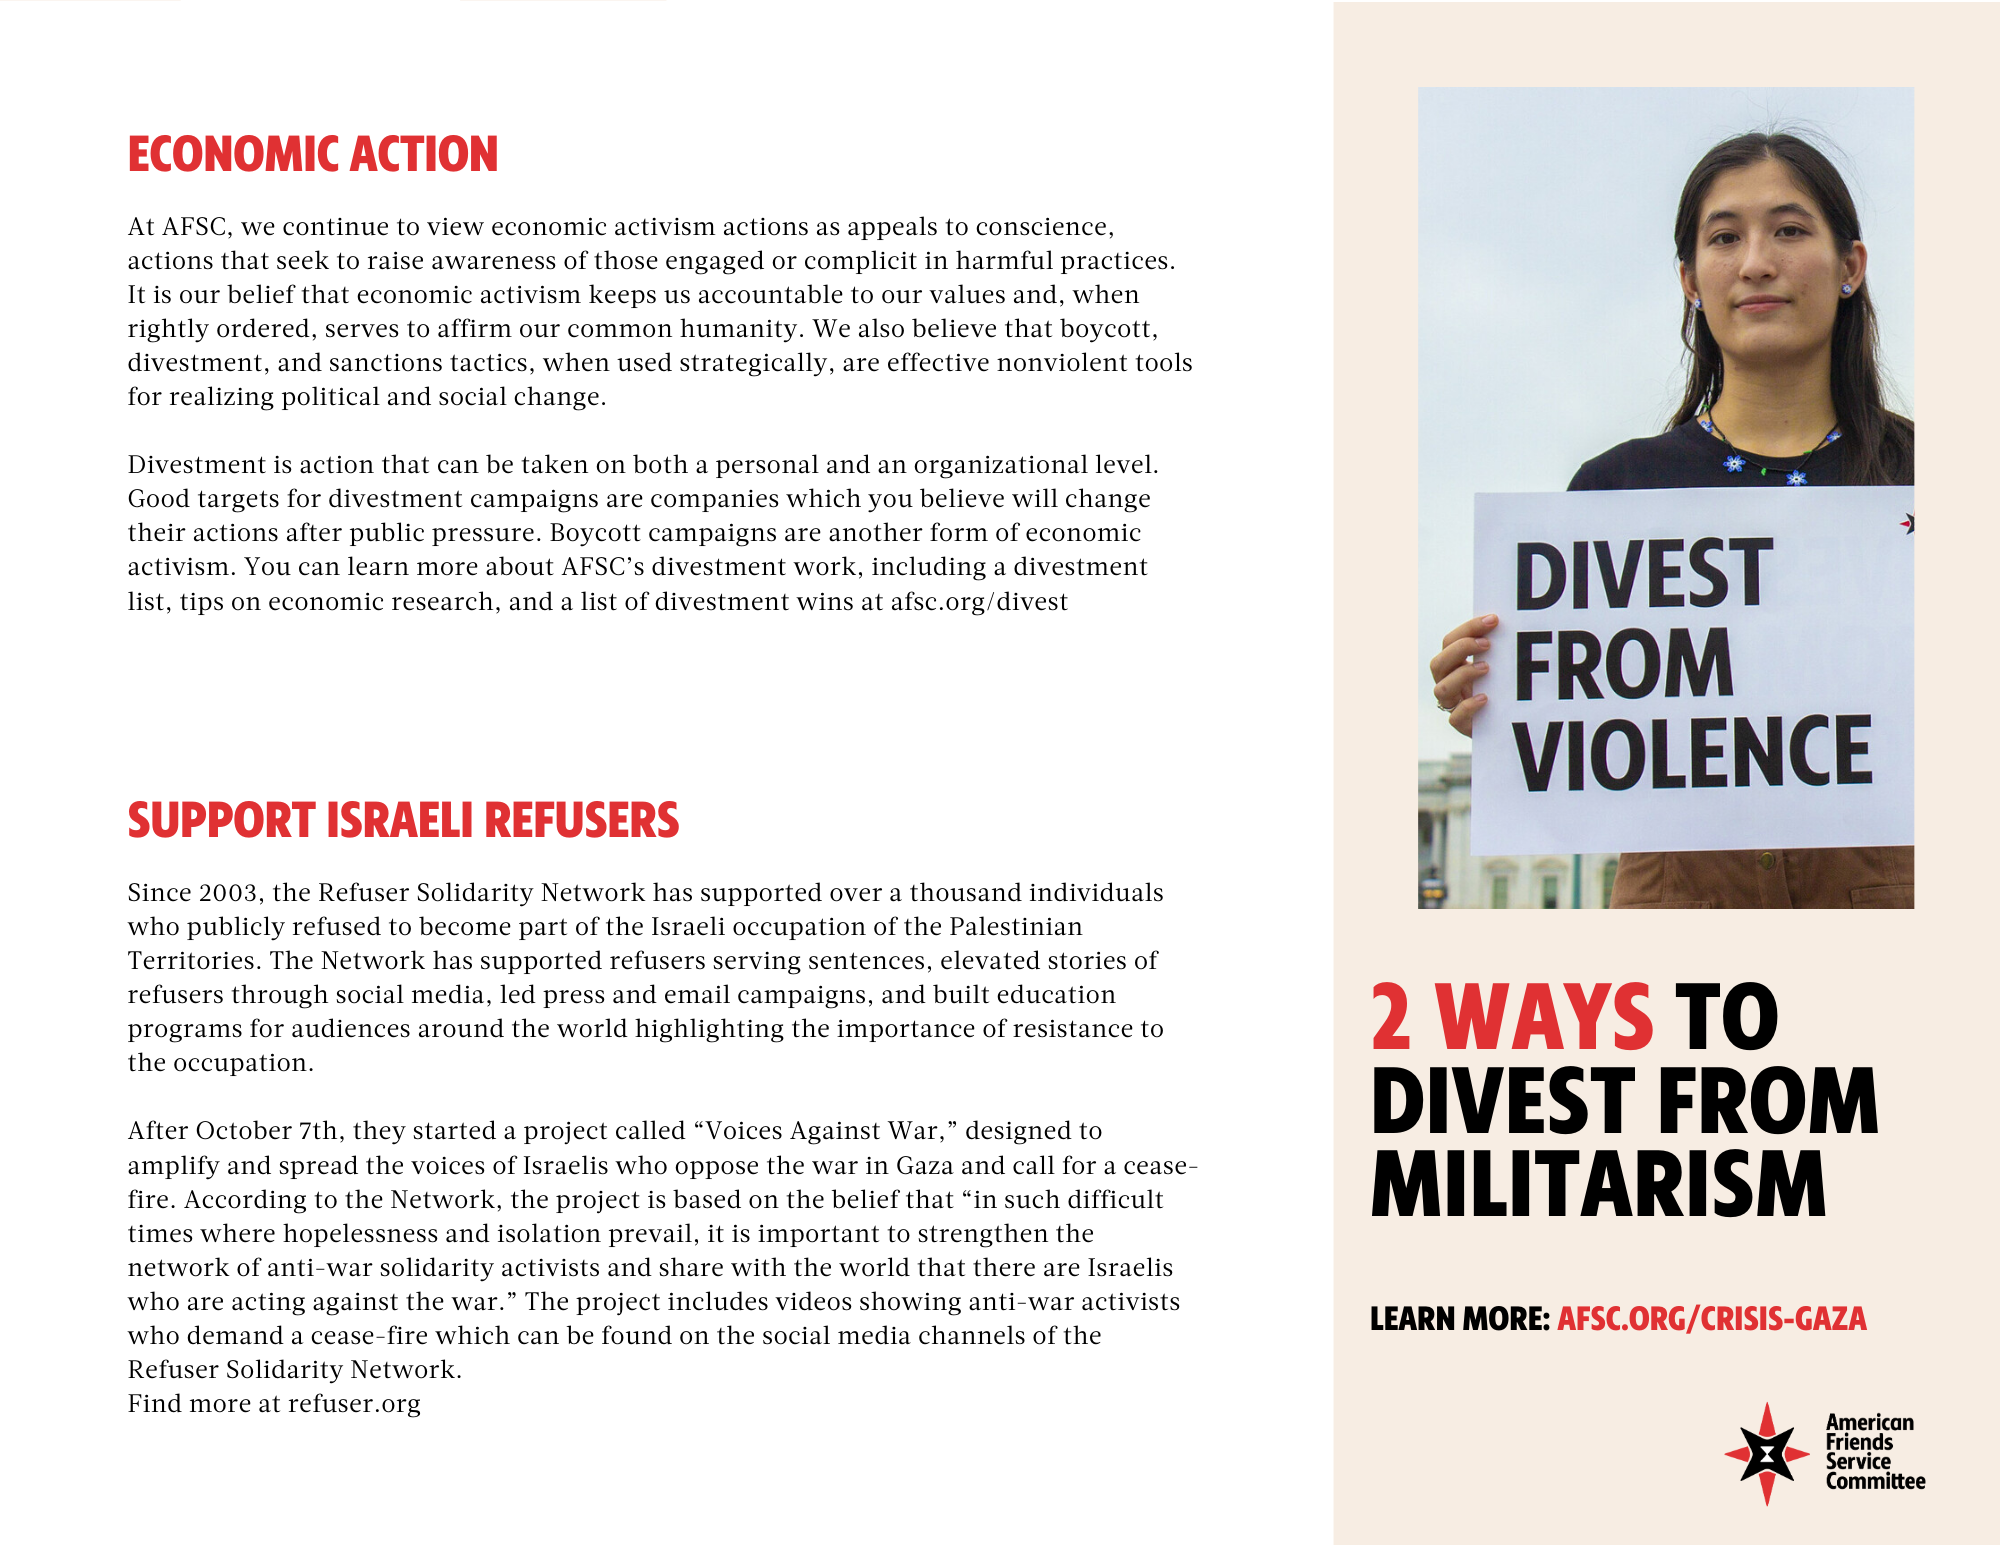 2 Ways to Divest from Militarism